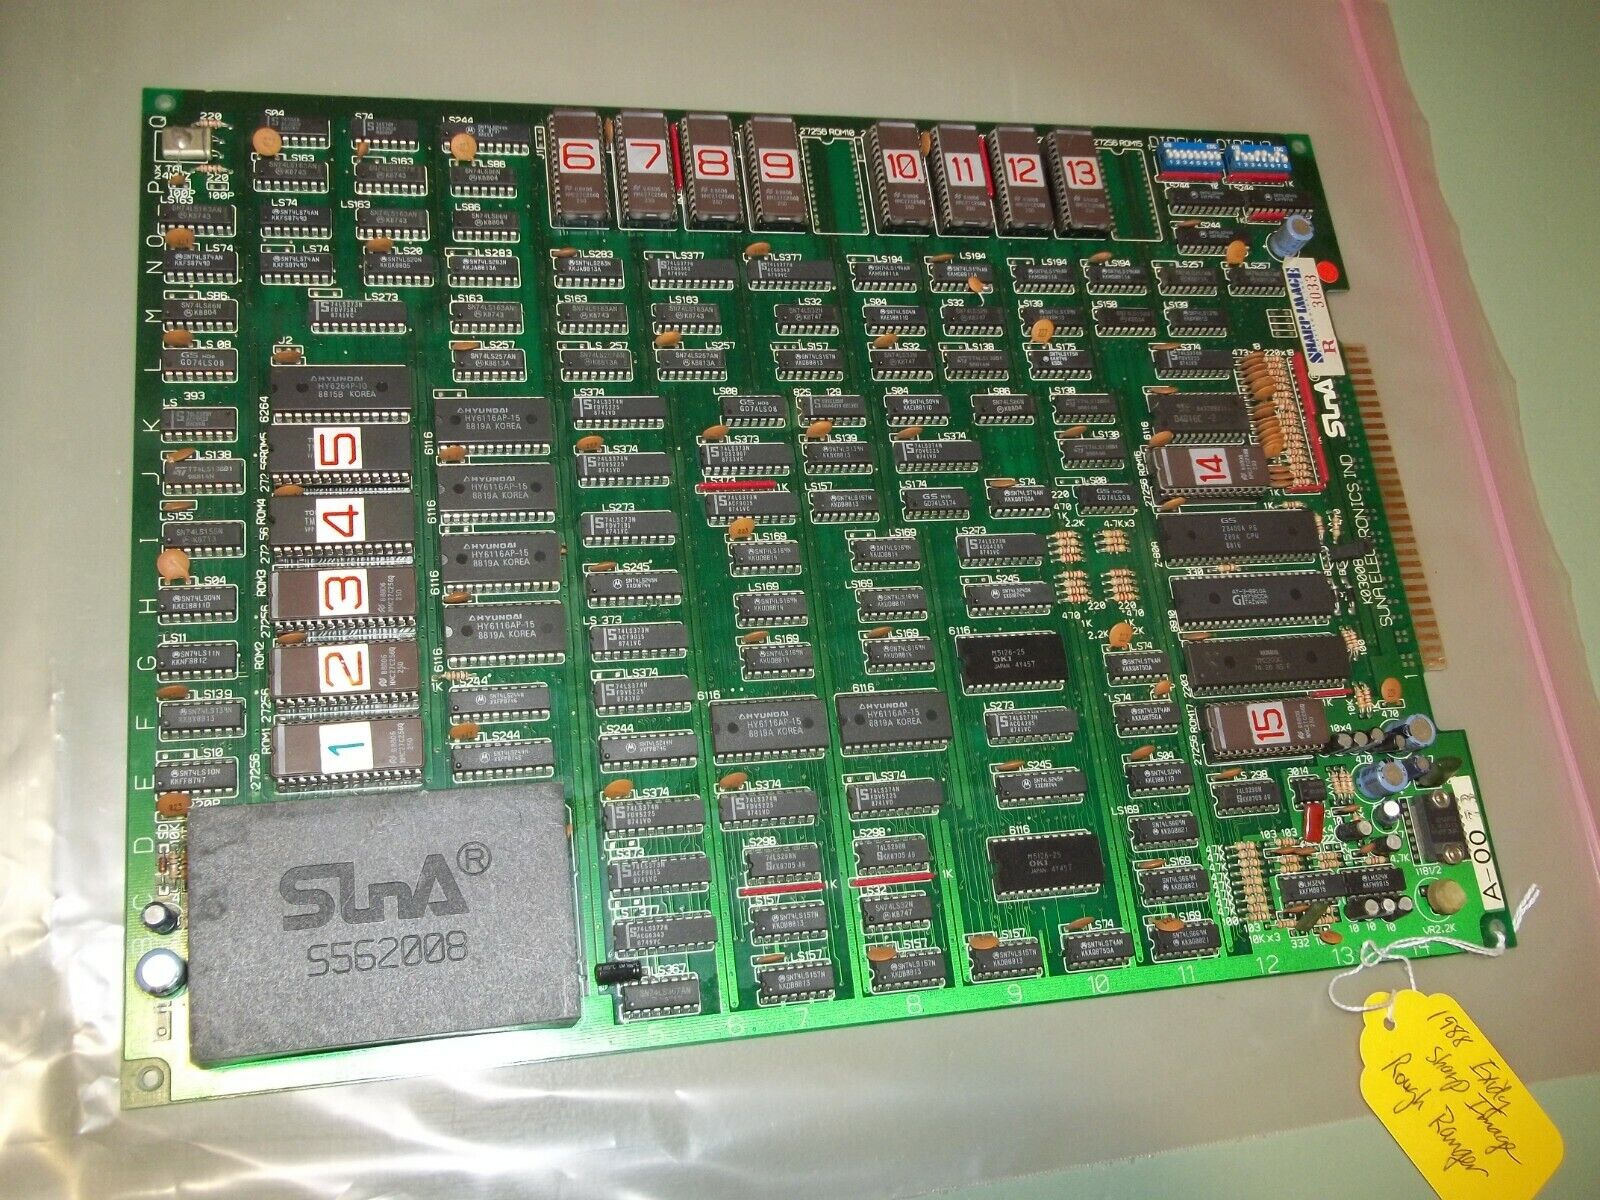 1988 Exidy Sharp Image ROUGH RANGER Video Arcade Game PCB Jamma Clean *WORKING*